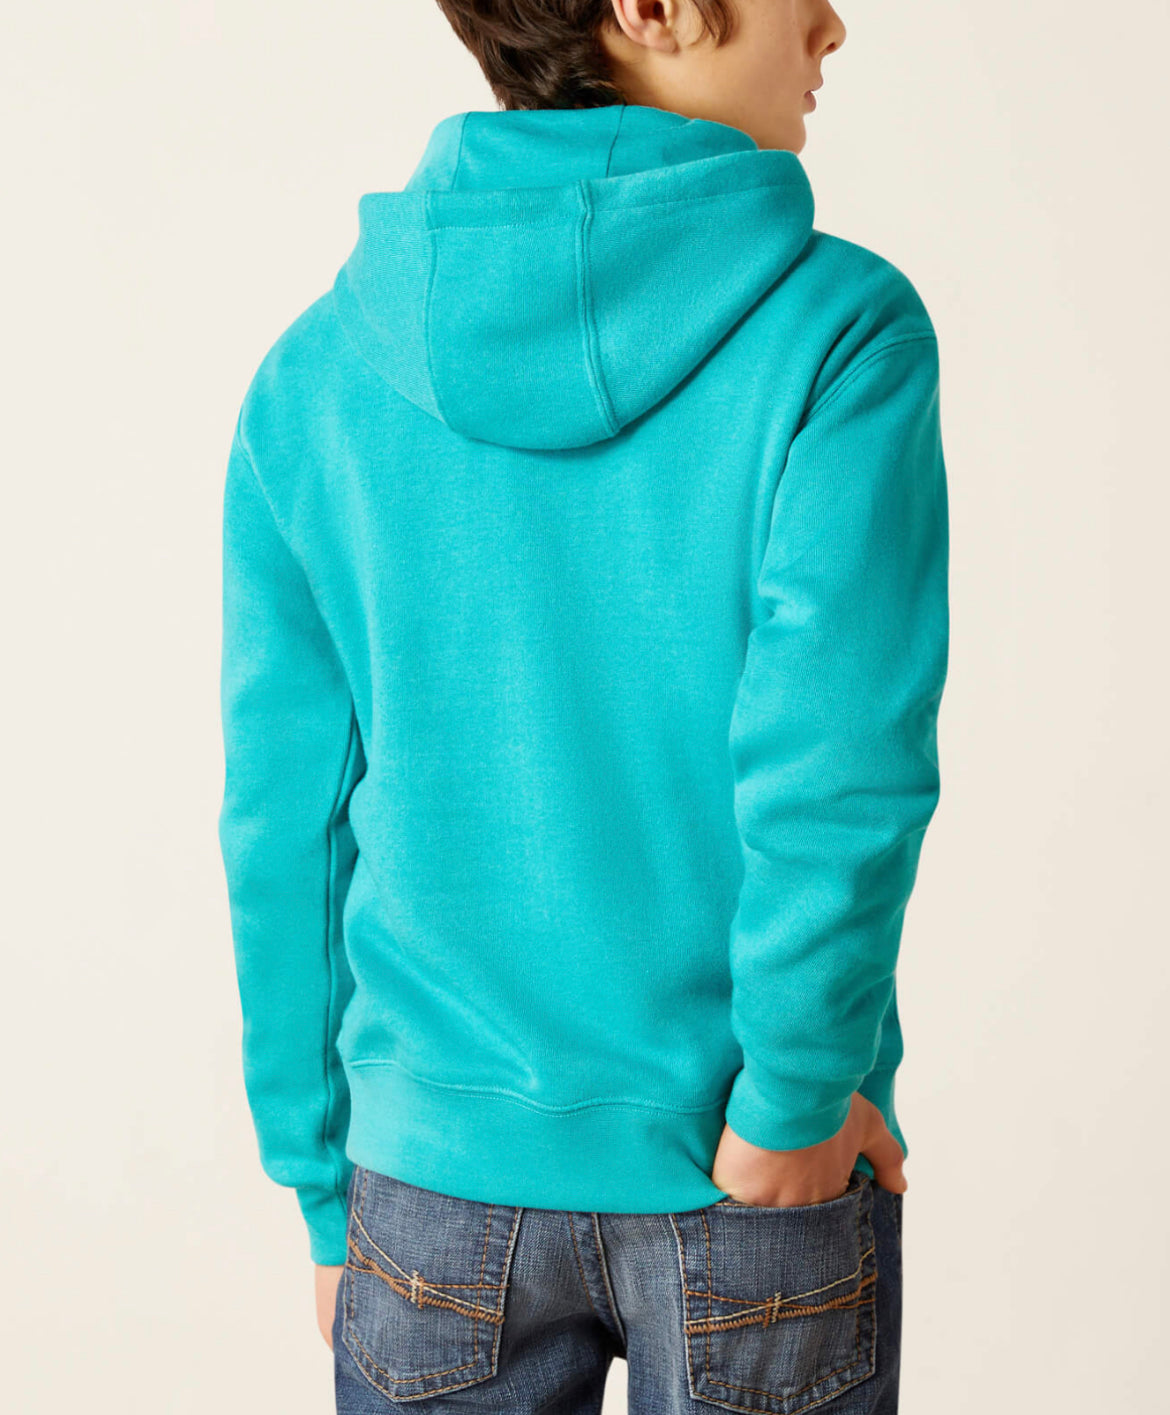 Ariat In Motion Hoodie Turquoise